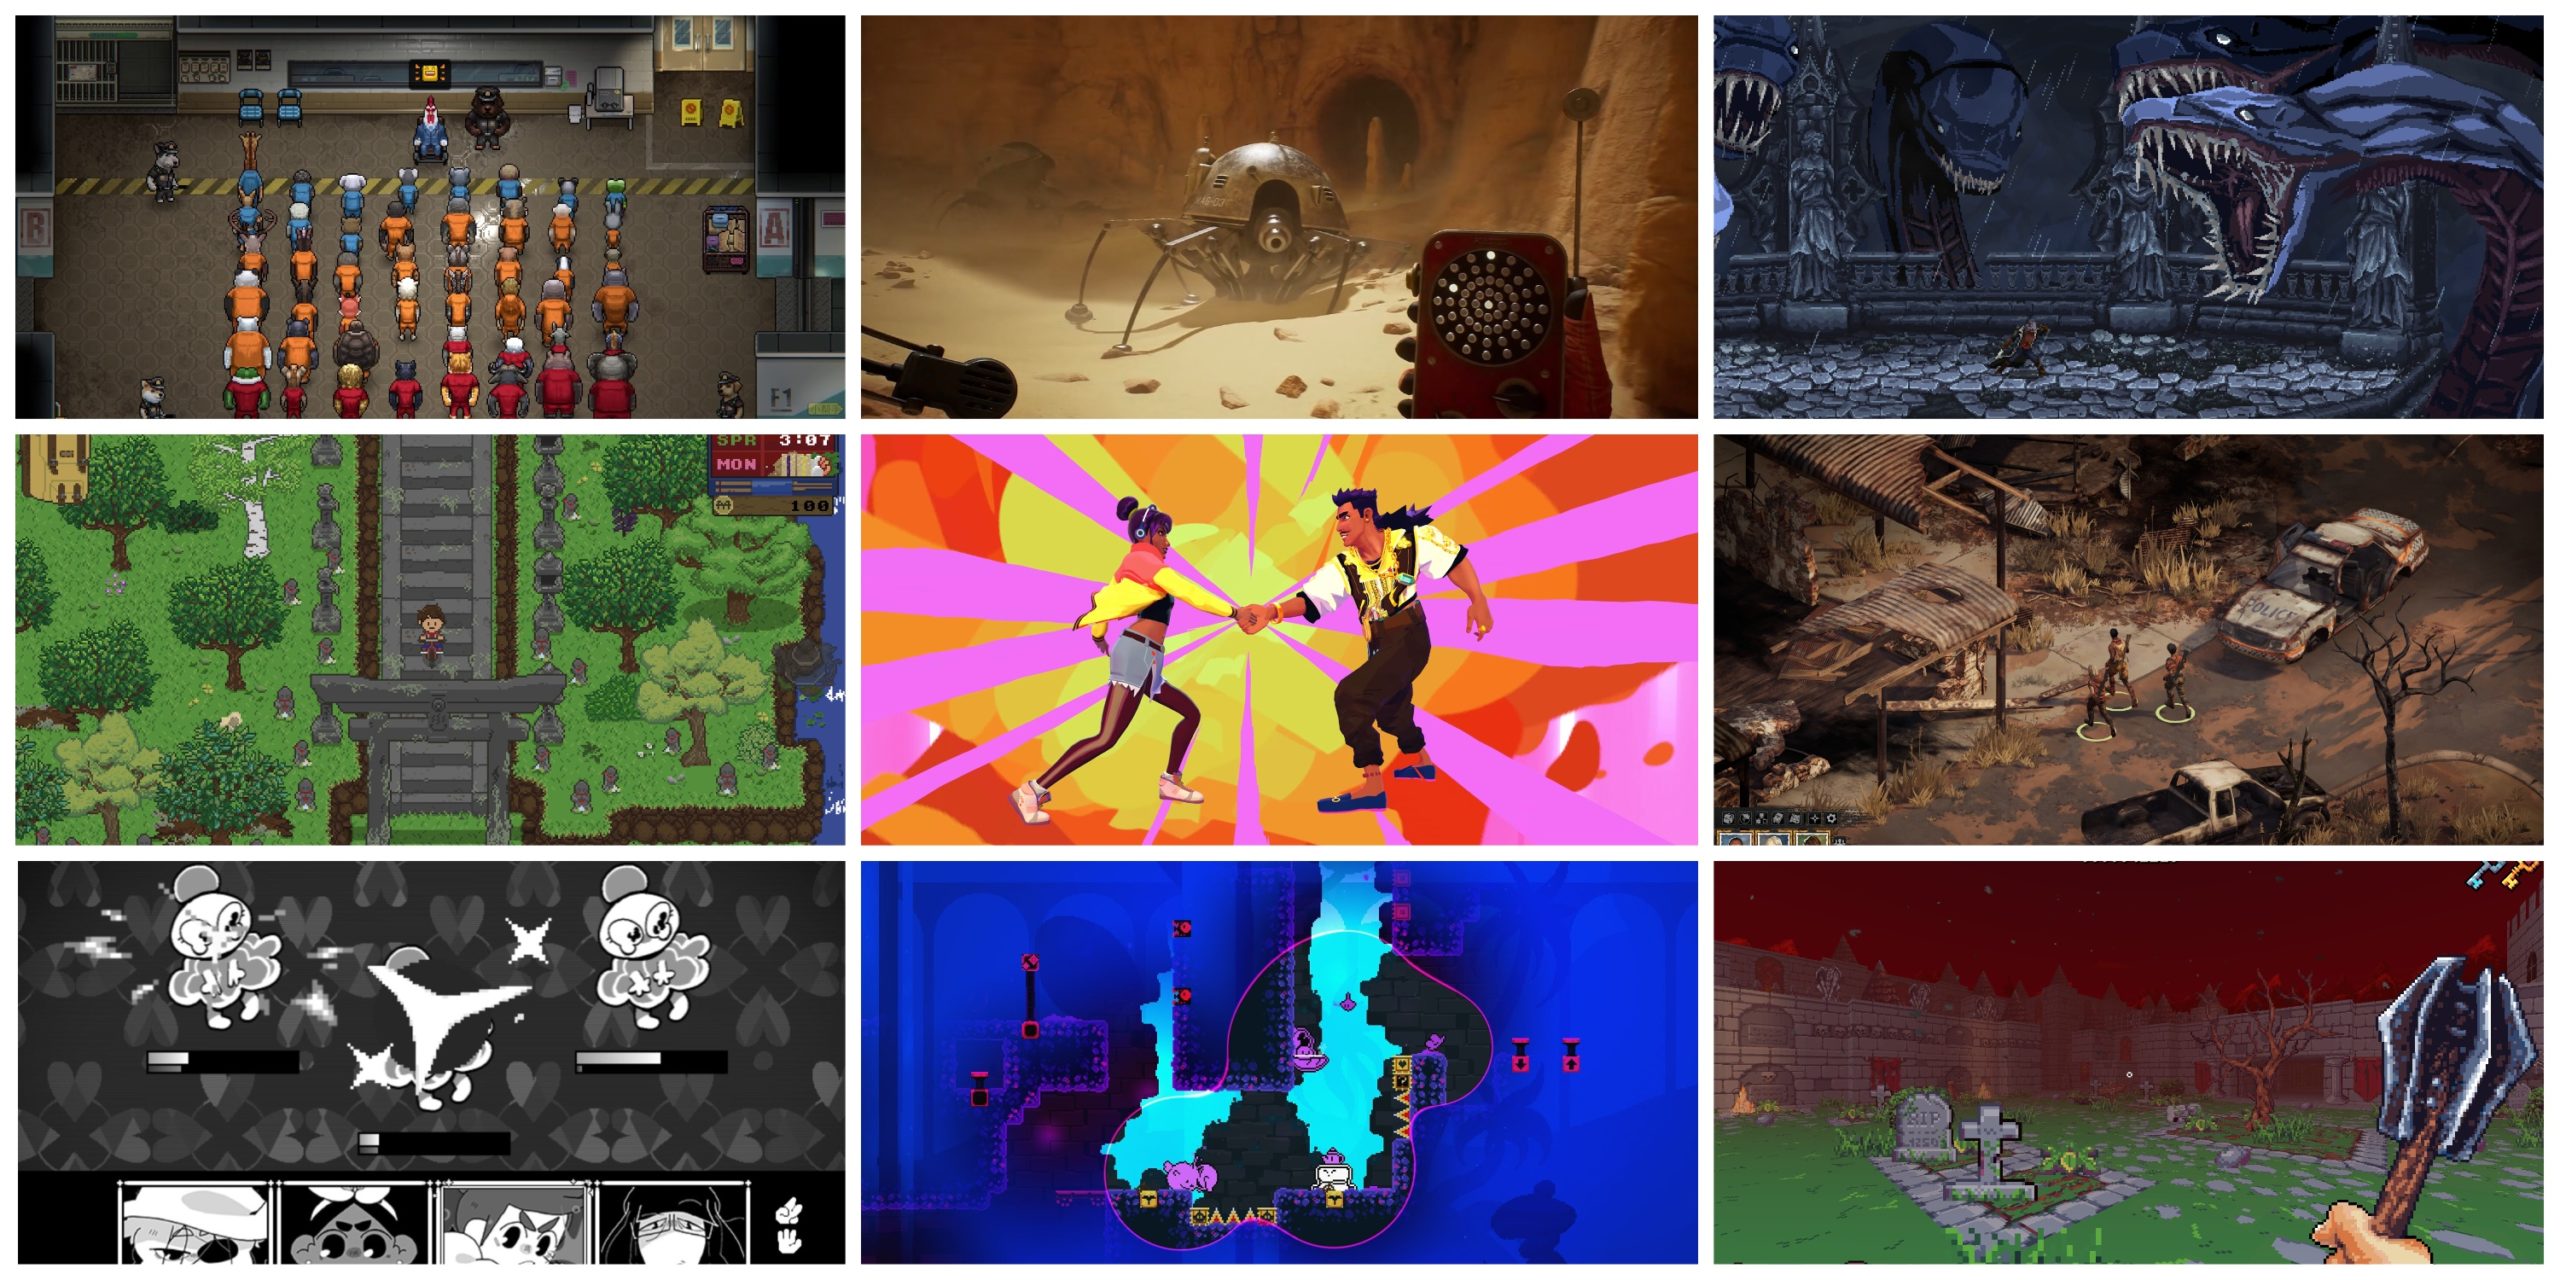 The best indie games for 2023